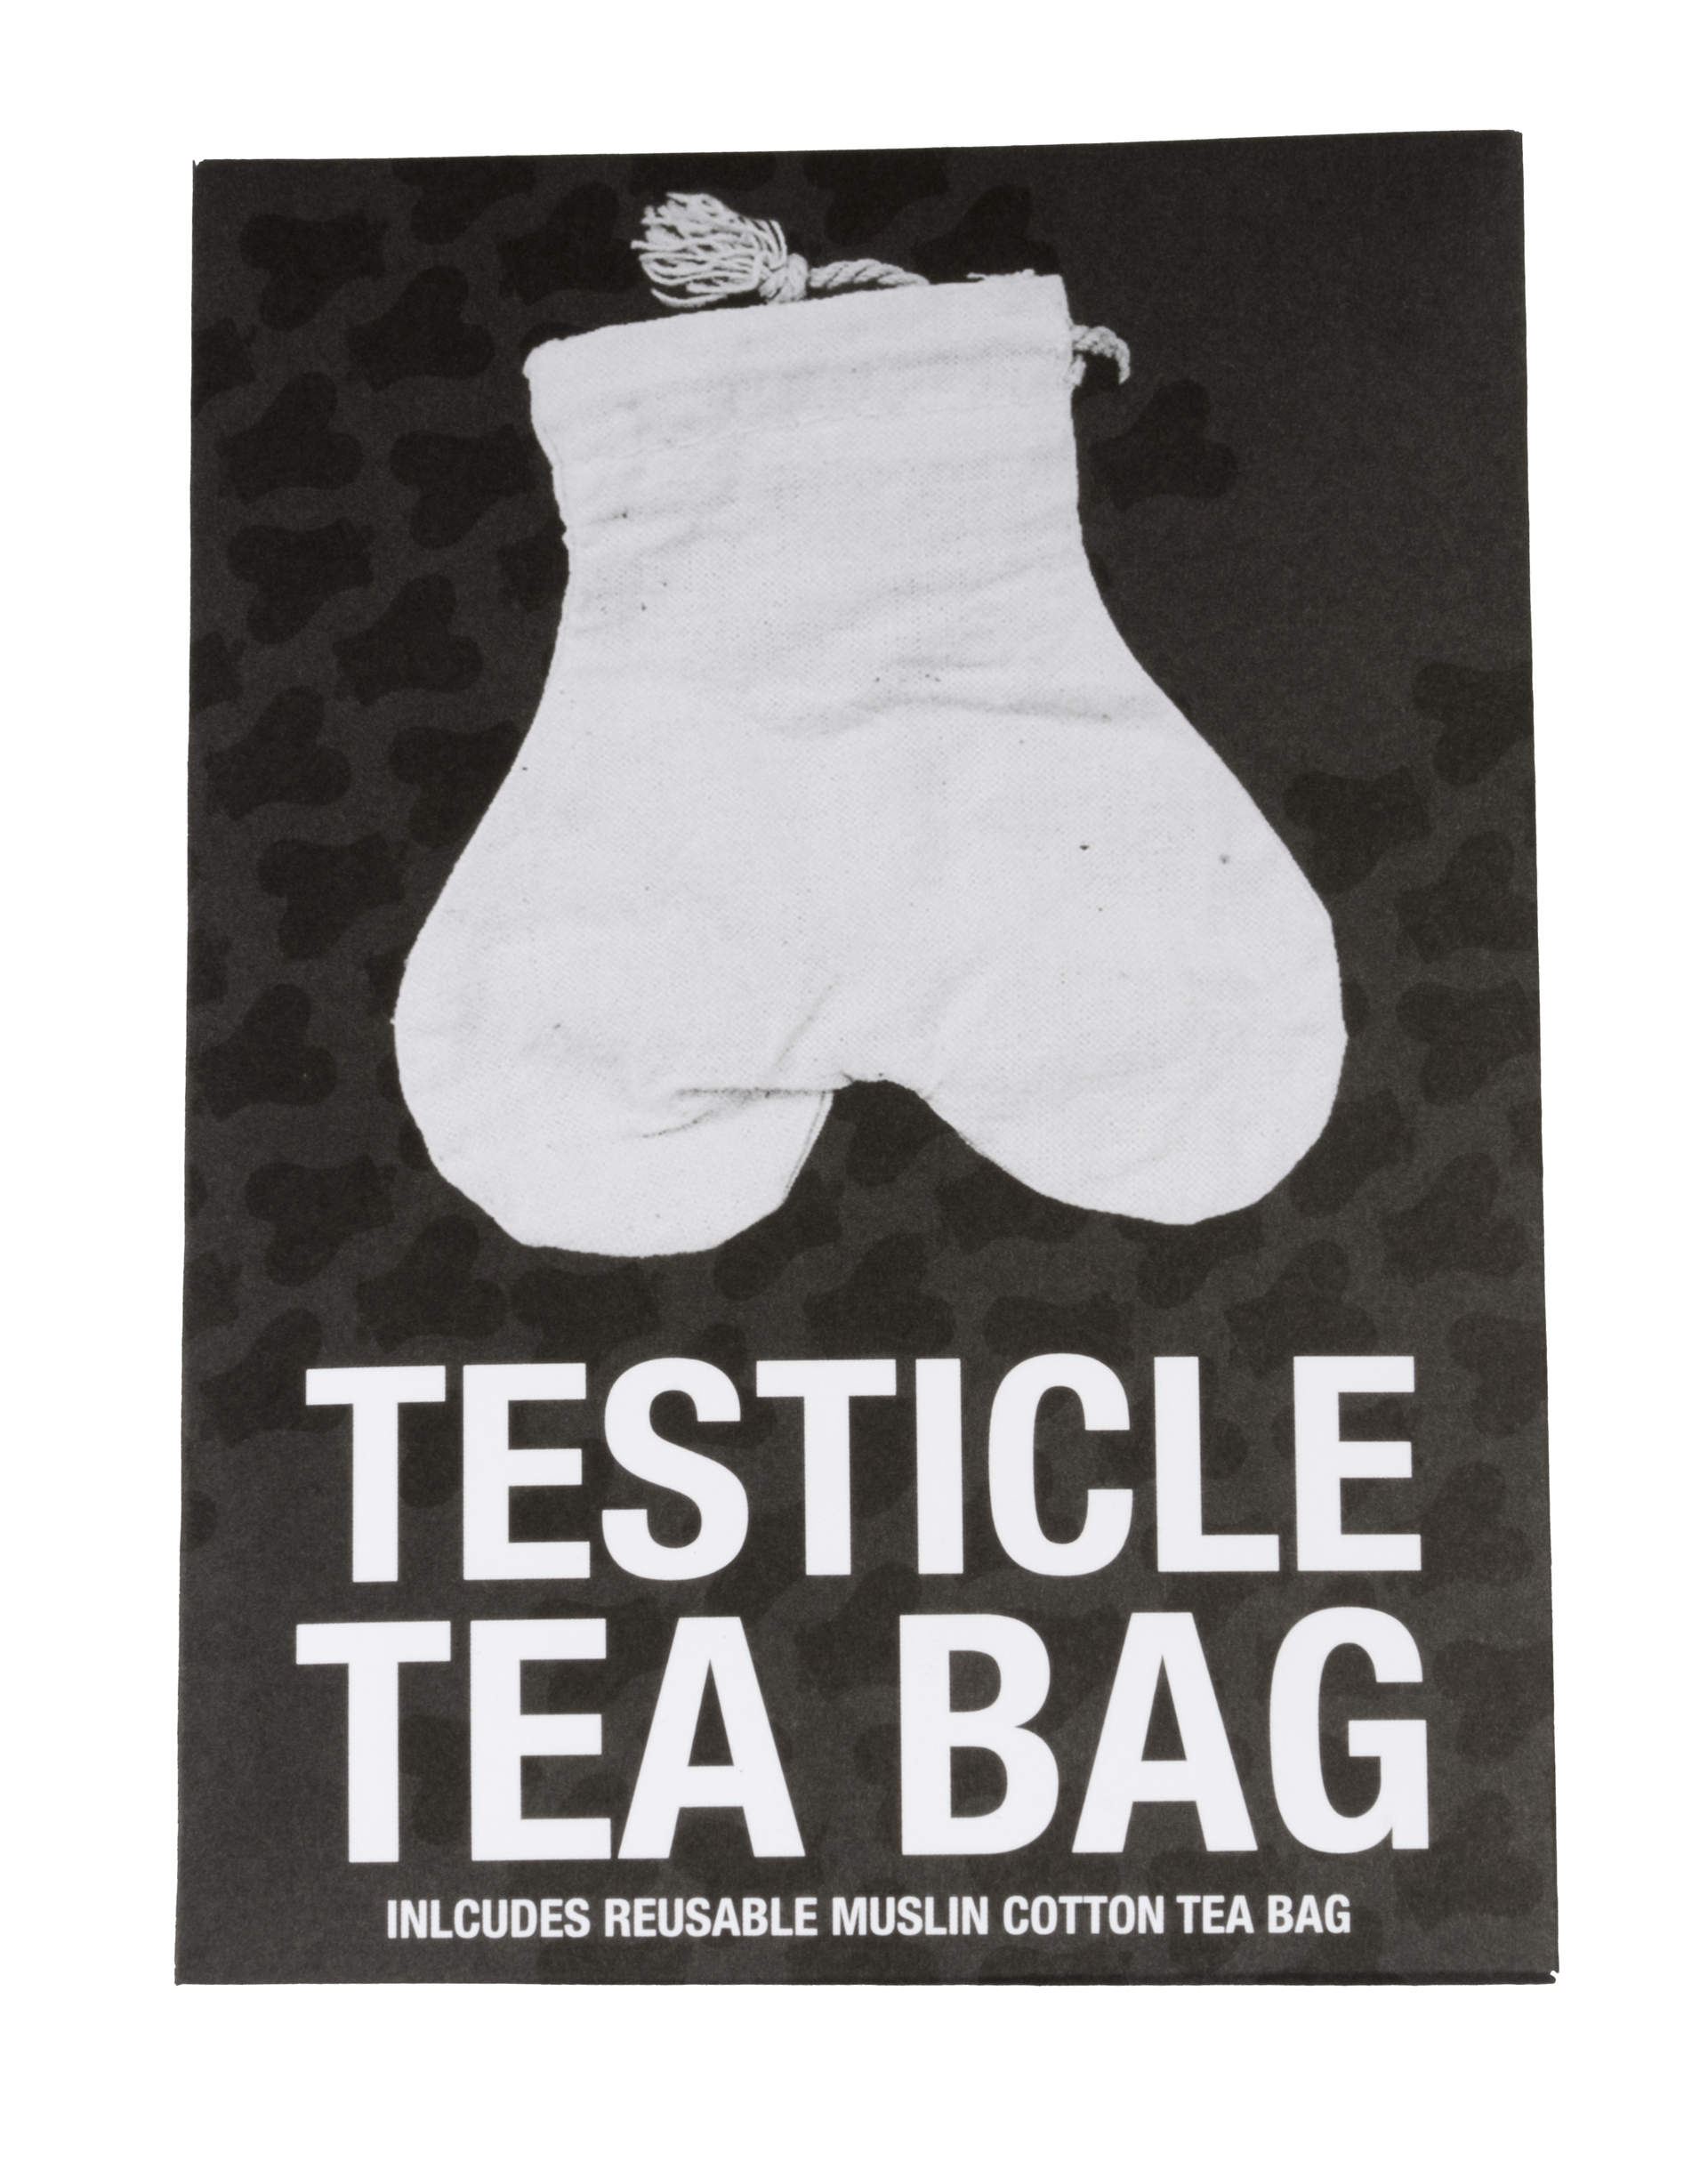 YOU'VE BEEN #TEABAGGED!